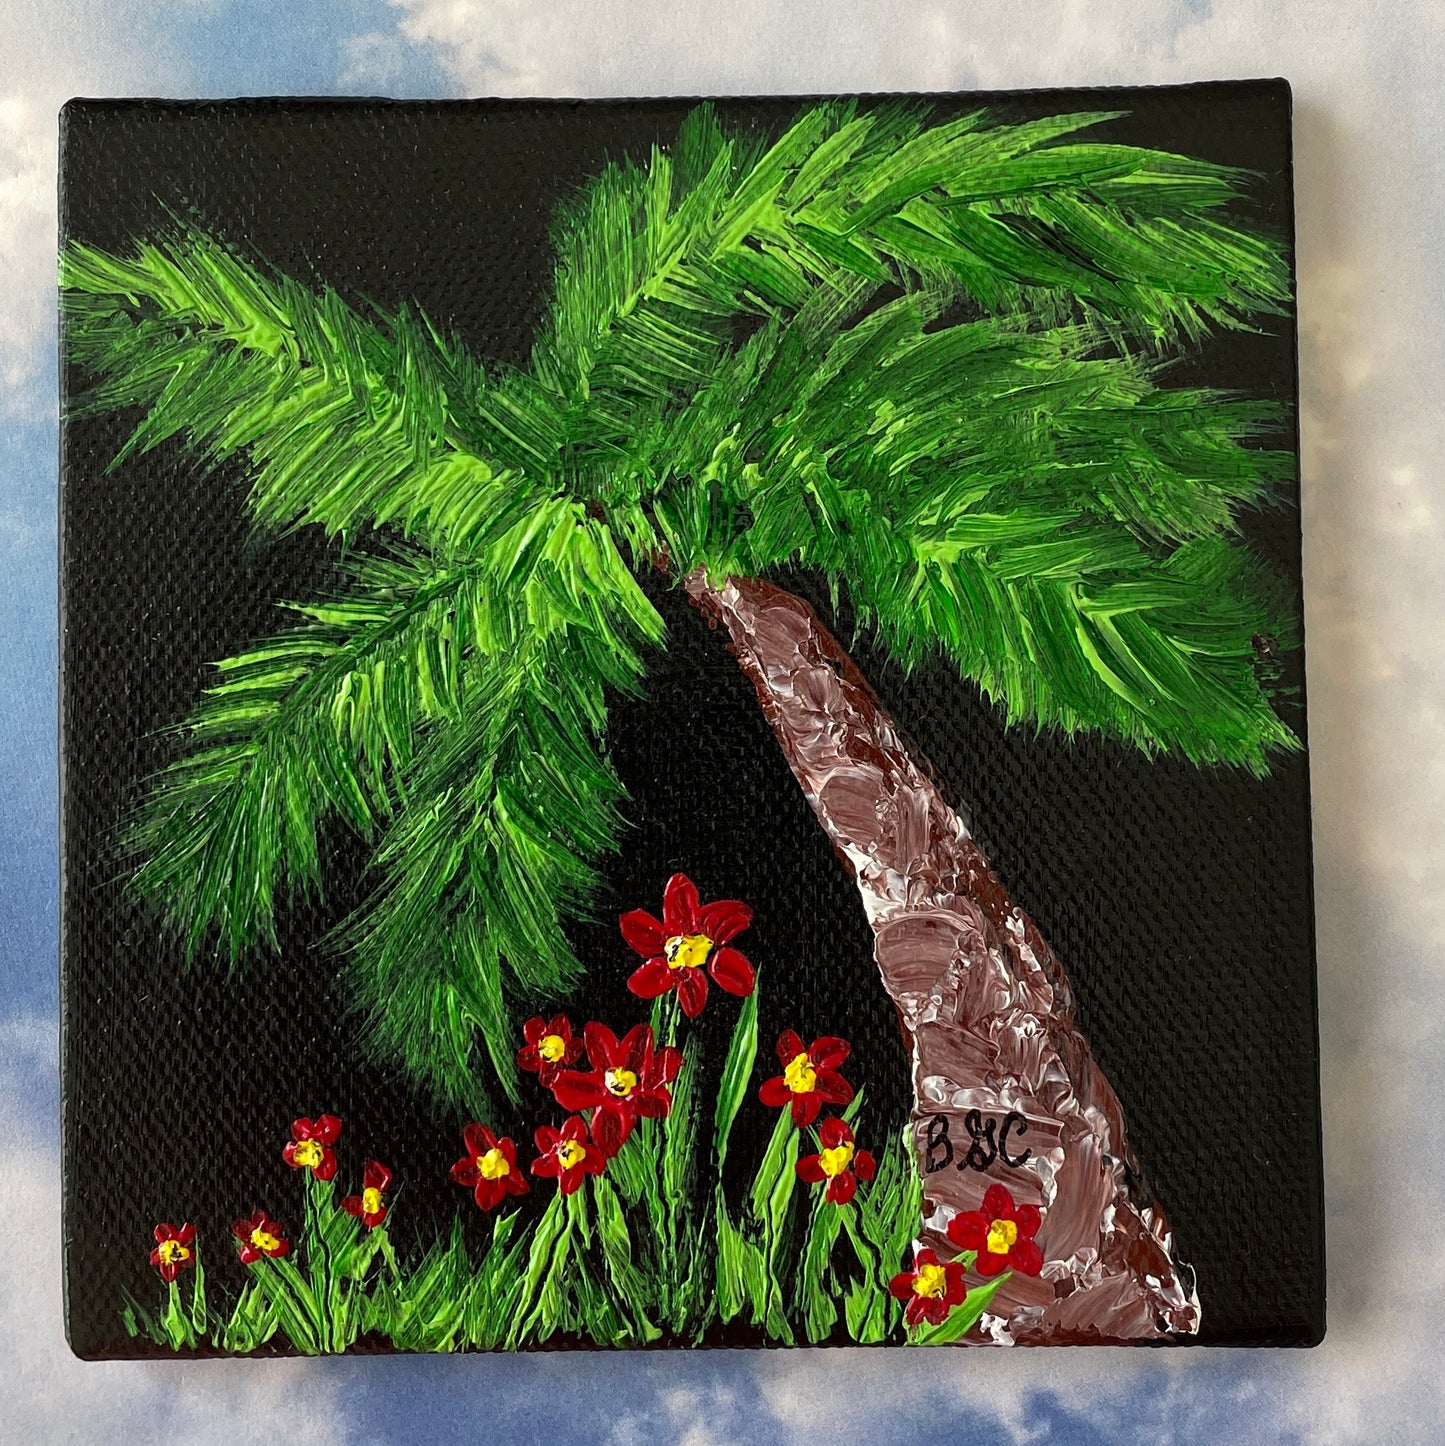 Original Painting of a Palm Tree with Red Flowers by Brenda